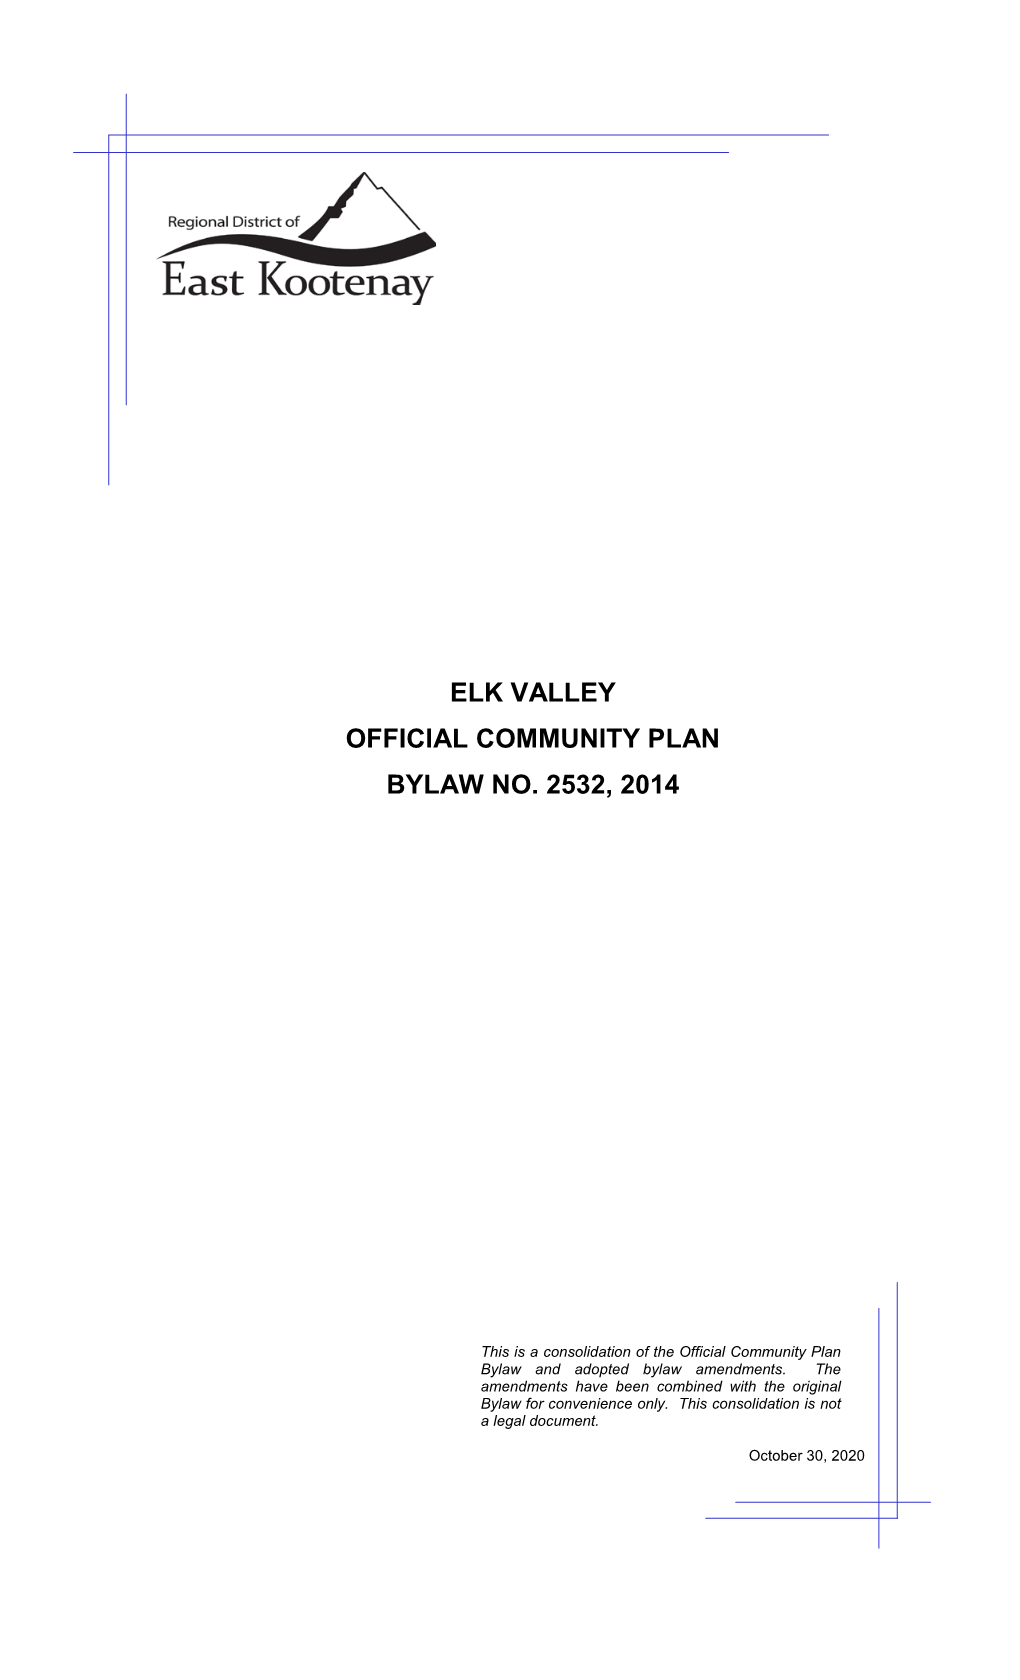 Elk Valley Official Community Plan Bylaw No. 2532, 2014”